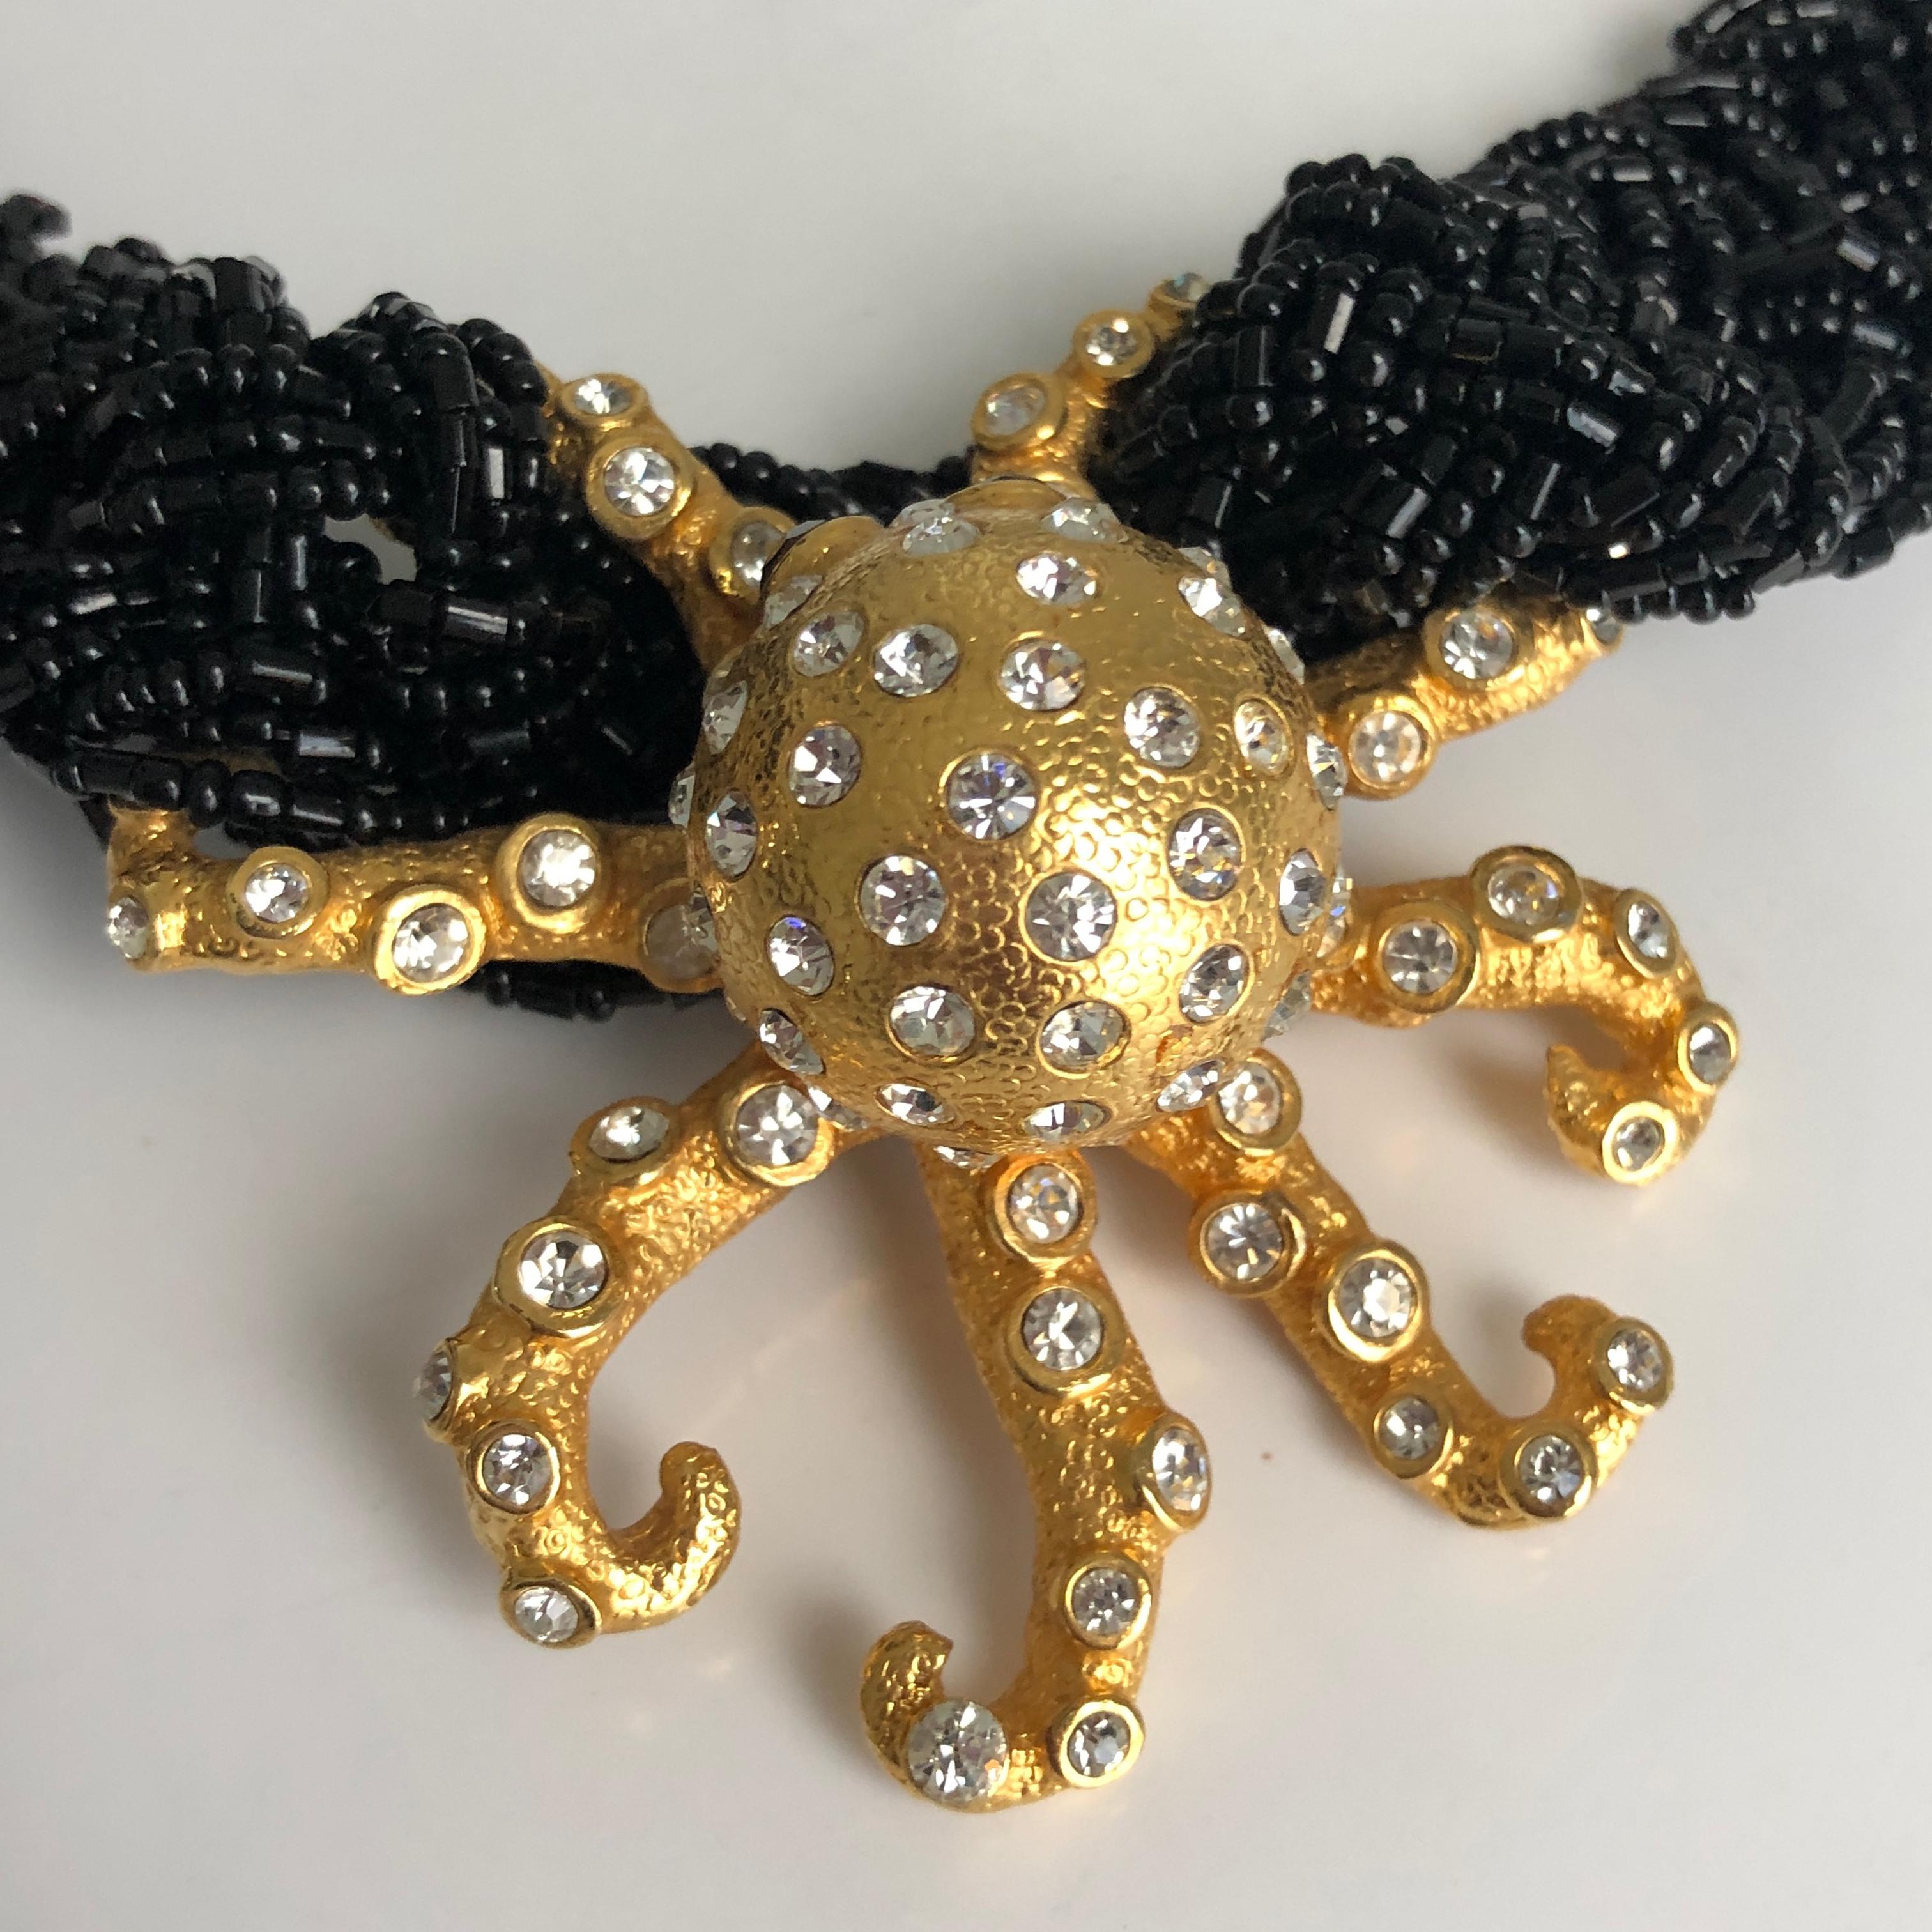 Embellished Octopus Necklace by Stephanie Lake Design Rare Statement Piece For Sale 4